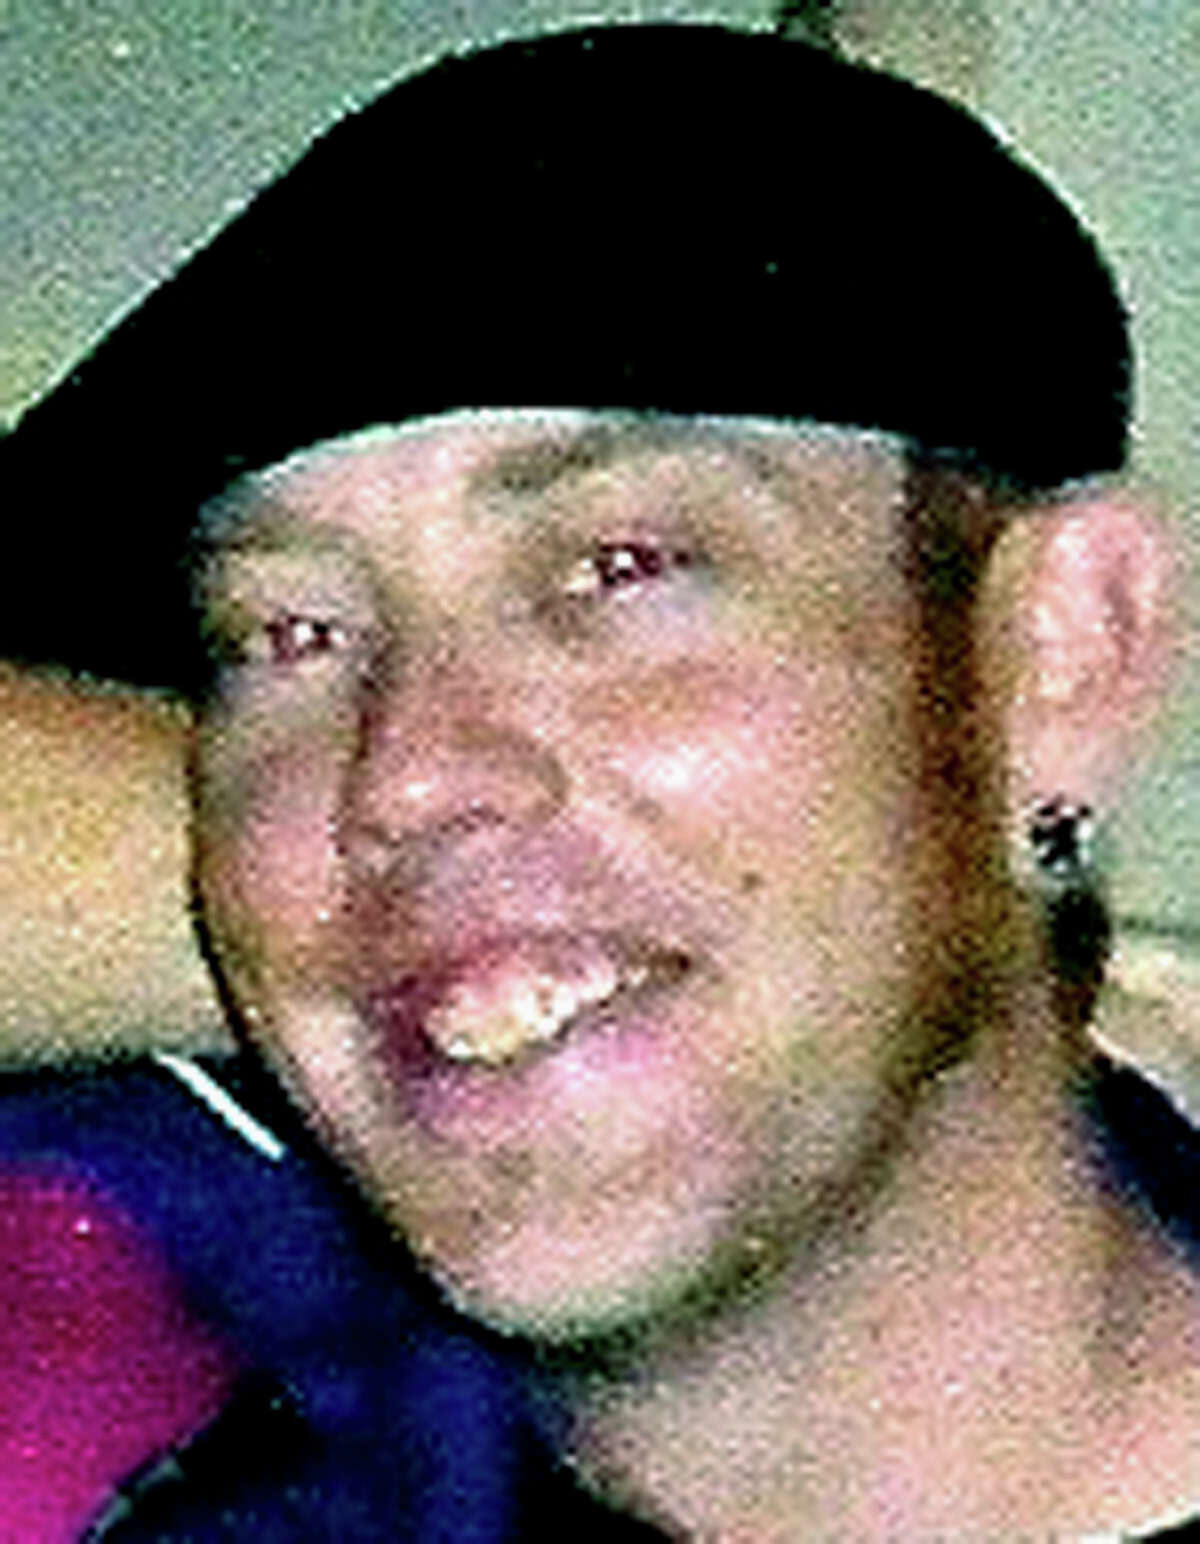 Jesse Stoddard, 33, died June 8, 2013 in New Milford. Courtesy of the Stoddard family